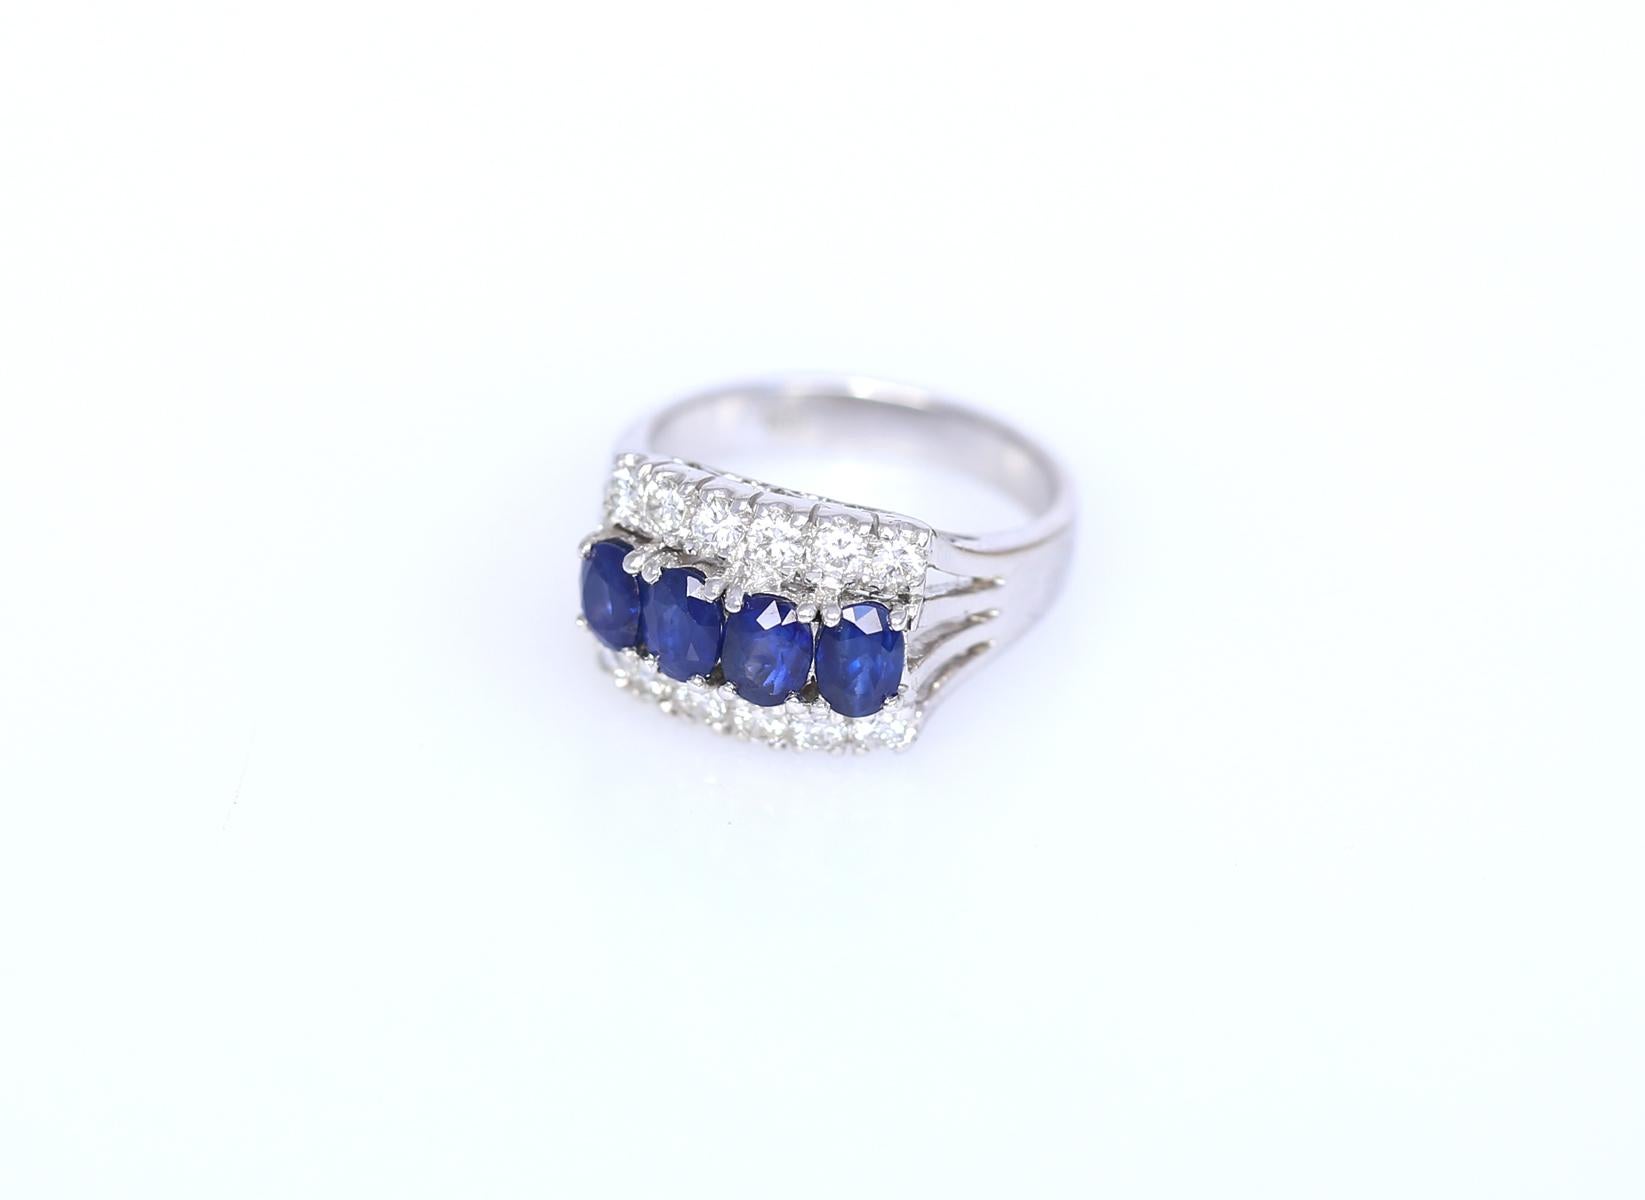 Sapphires Diamonds 18K White Gold Modern Ring. The ring is relatively modern yet the styling is classic and will not grow out of fashion. A line of four oval-shaped deep blue Sapphires is underlined by two rows of fine round-cut Diamonds, six stones